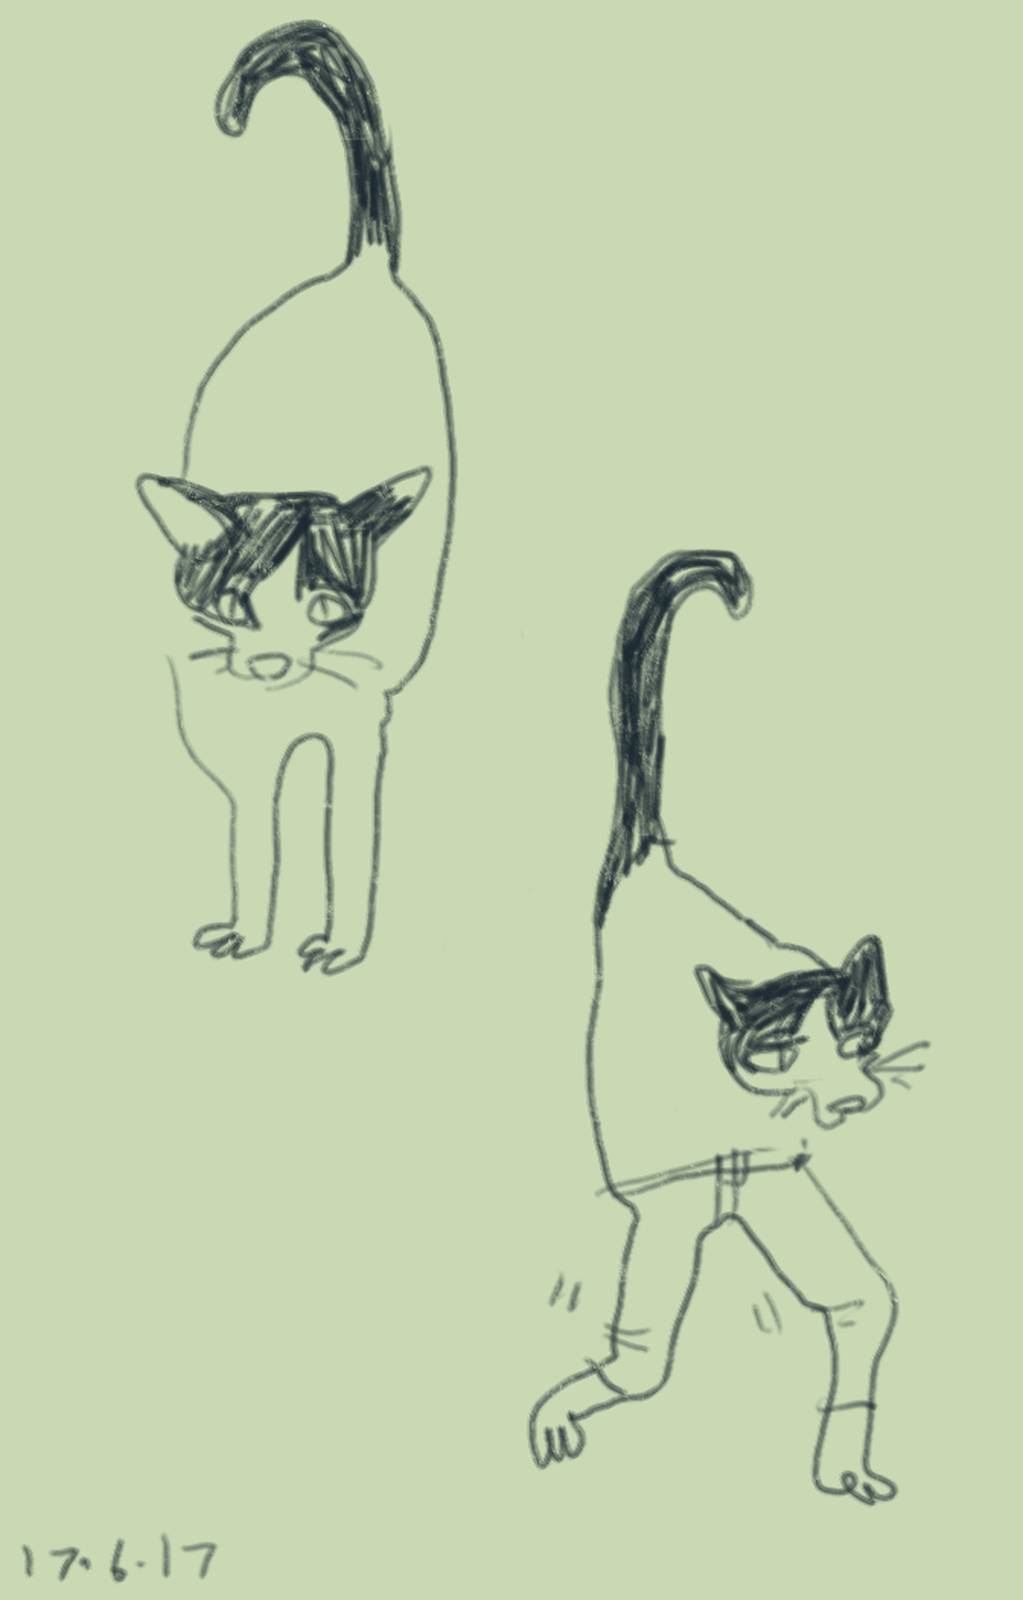 Sketch of a two legged cat, and the same two leggec cat walking around with pants on